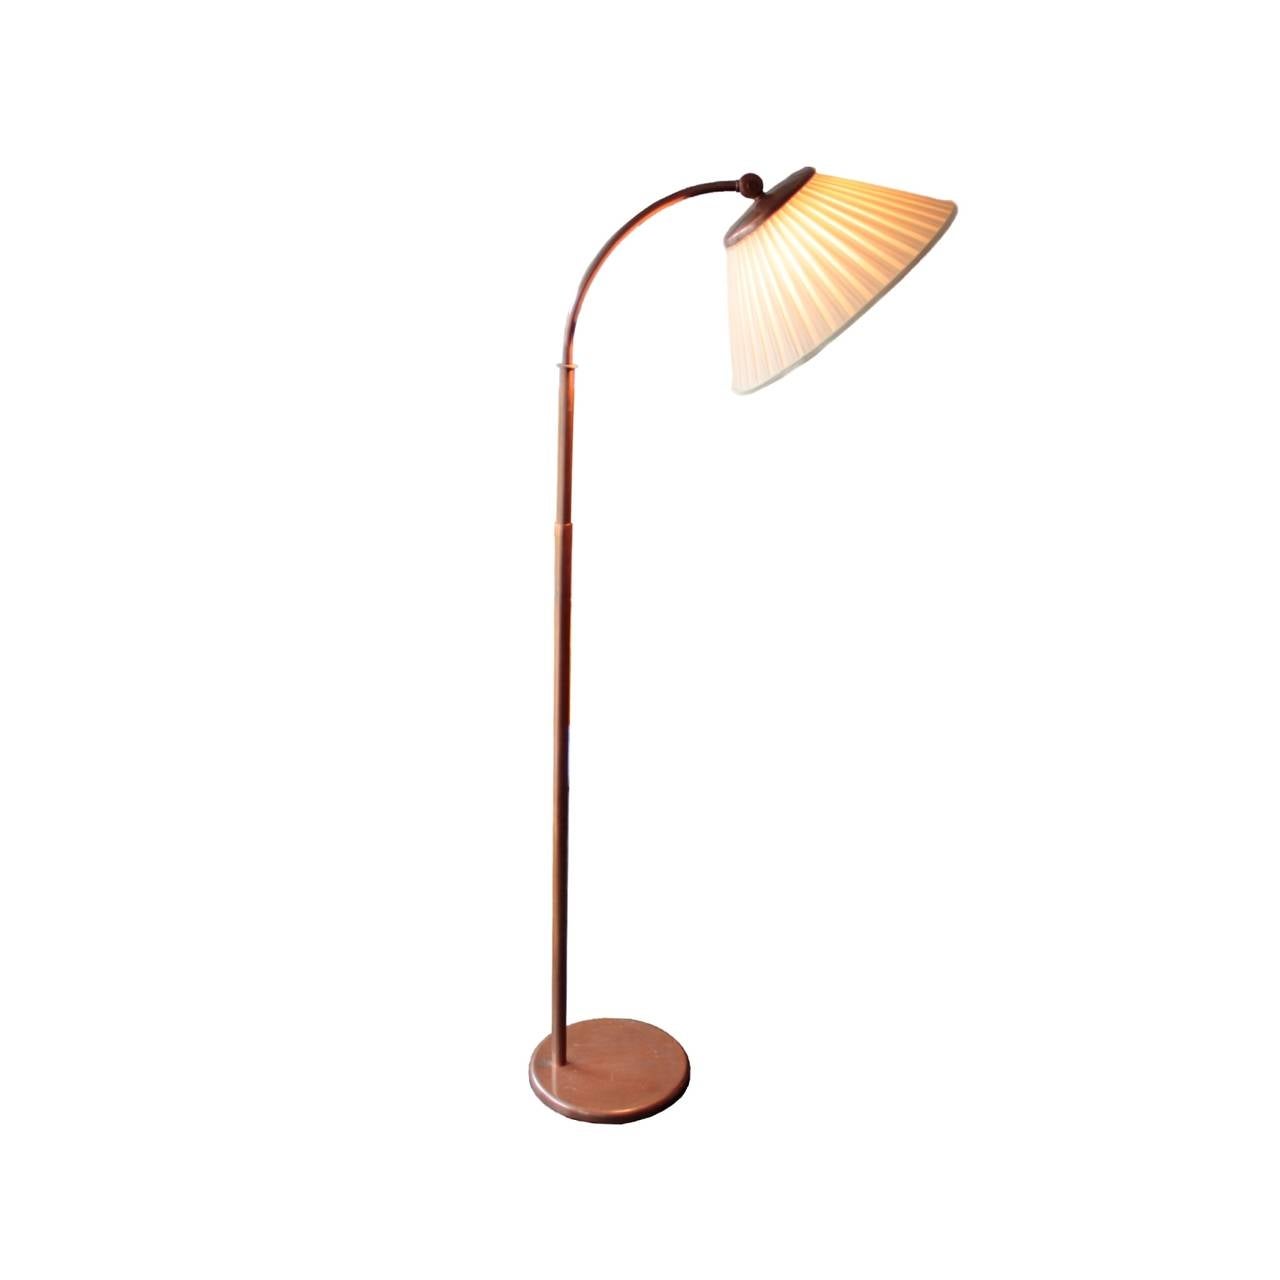 Having a weighted base, pole with adjustable height and a swivel (new) shade. Fitted with three light bulbs and a handle for swivel adjustment. "Nessen Studios NY" impression on the base. 

Measurements: 11" base diameter, 50"